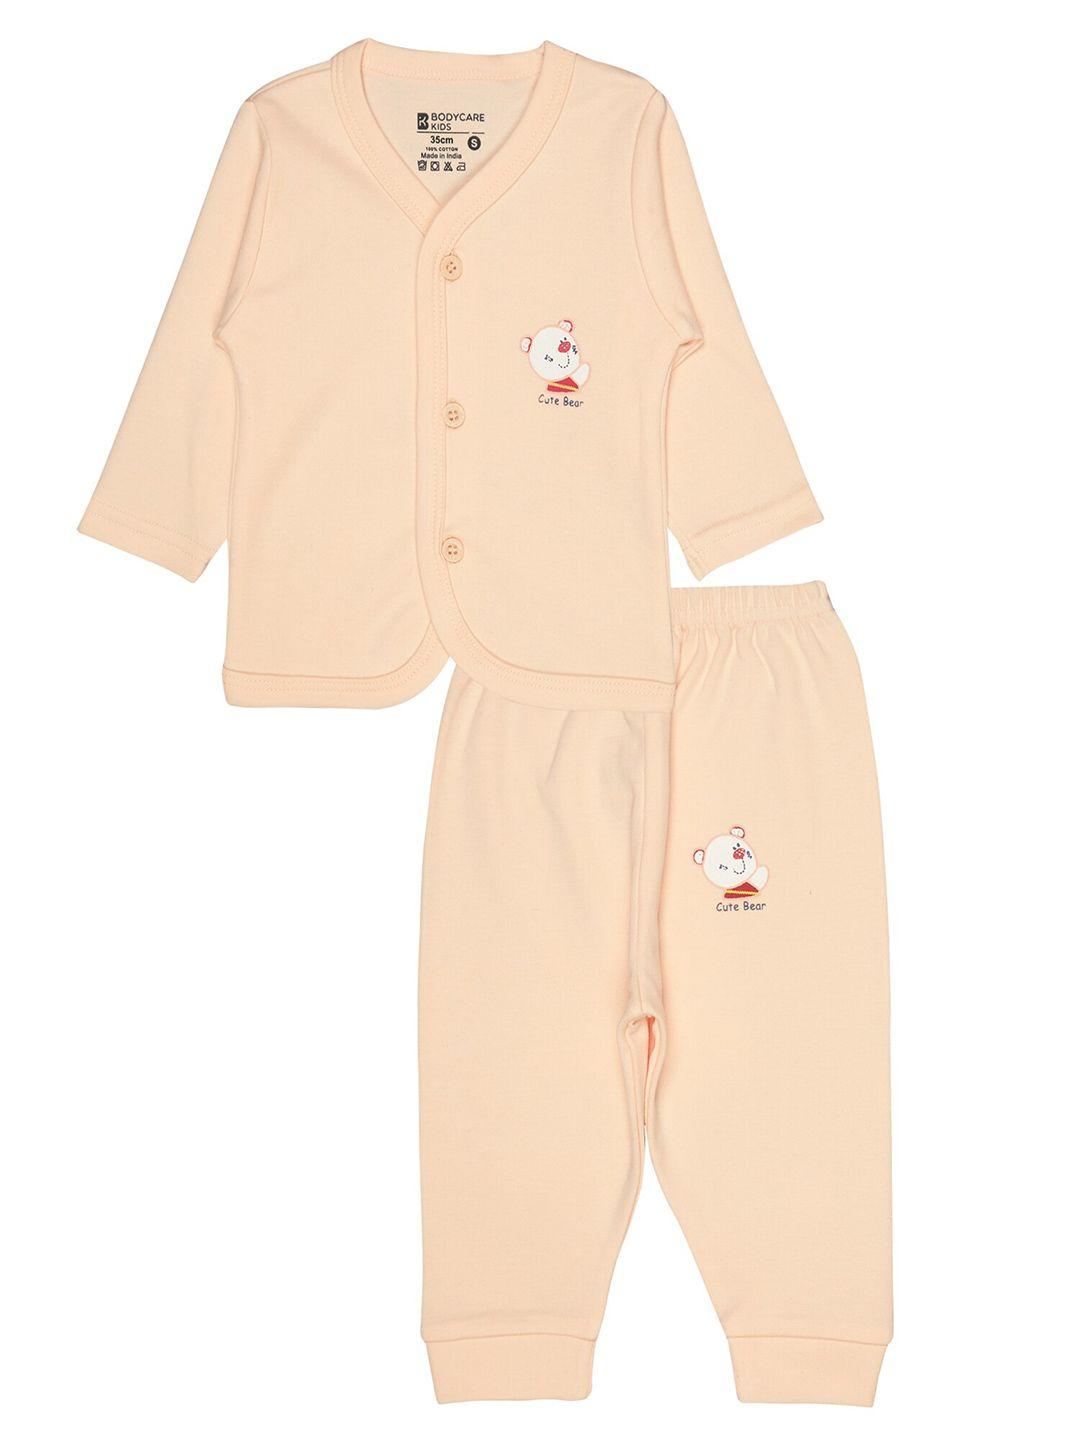 bodycare kids kids v-neck shirt with trousers